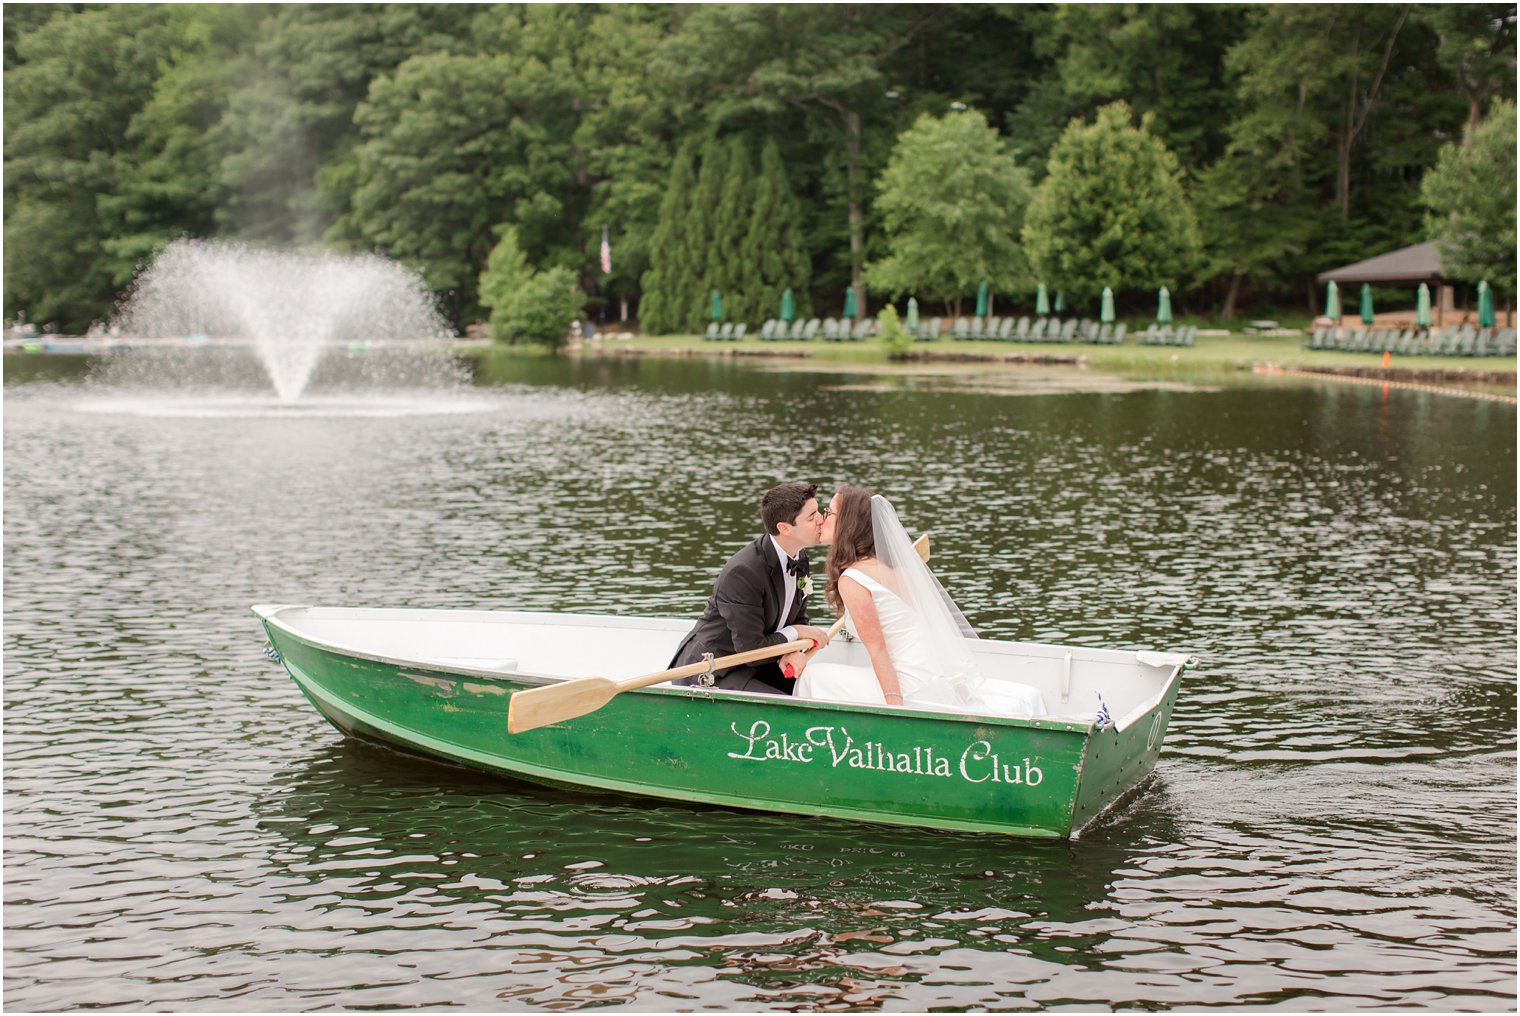 Lake Valhalla Club photo of couple in a rowboat